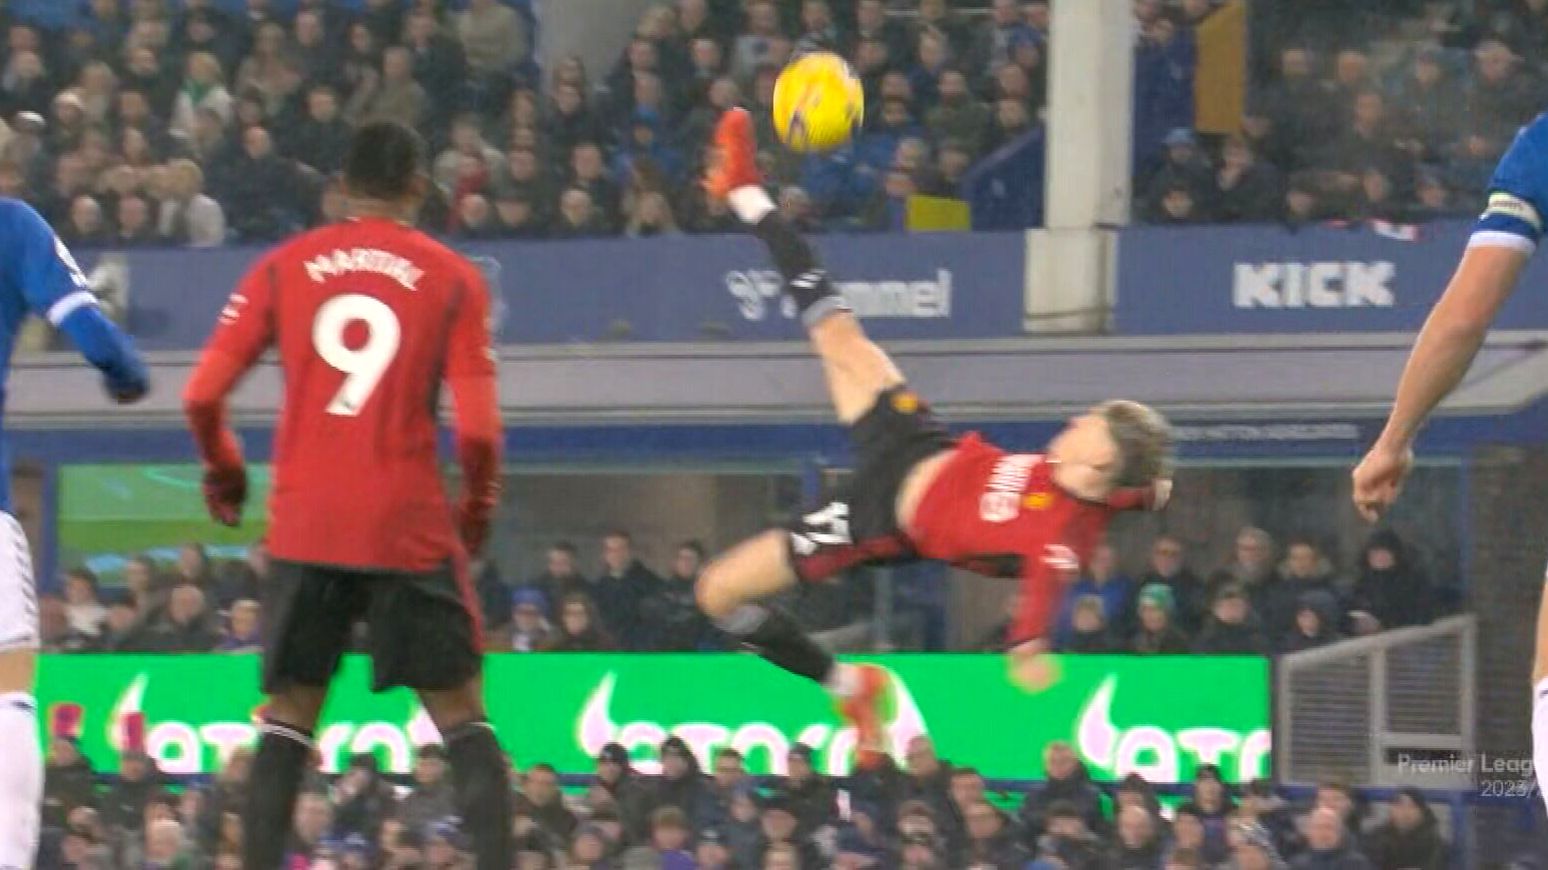 Alejandro Garnacho stunned the Premier League with this goal.